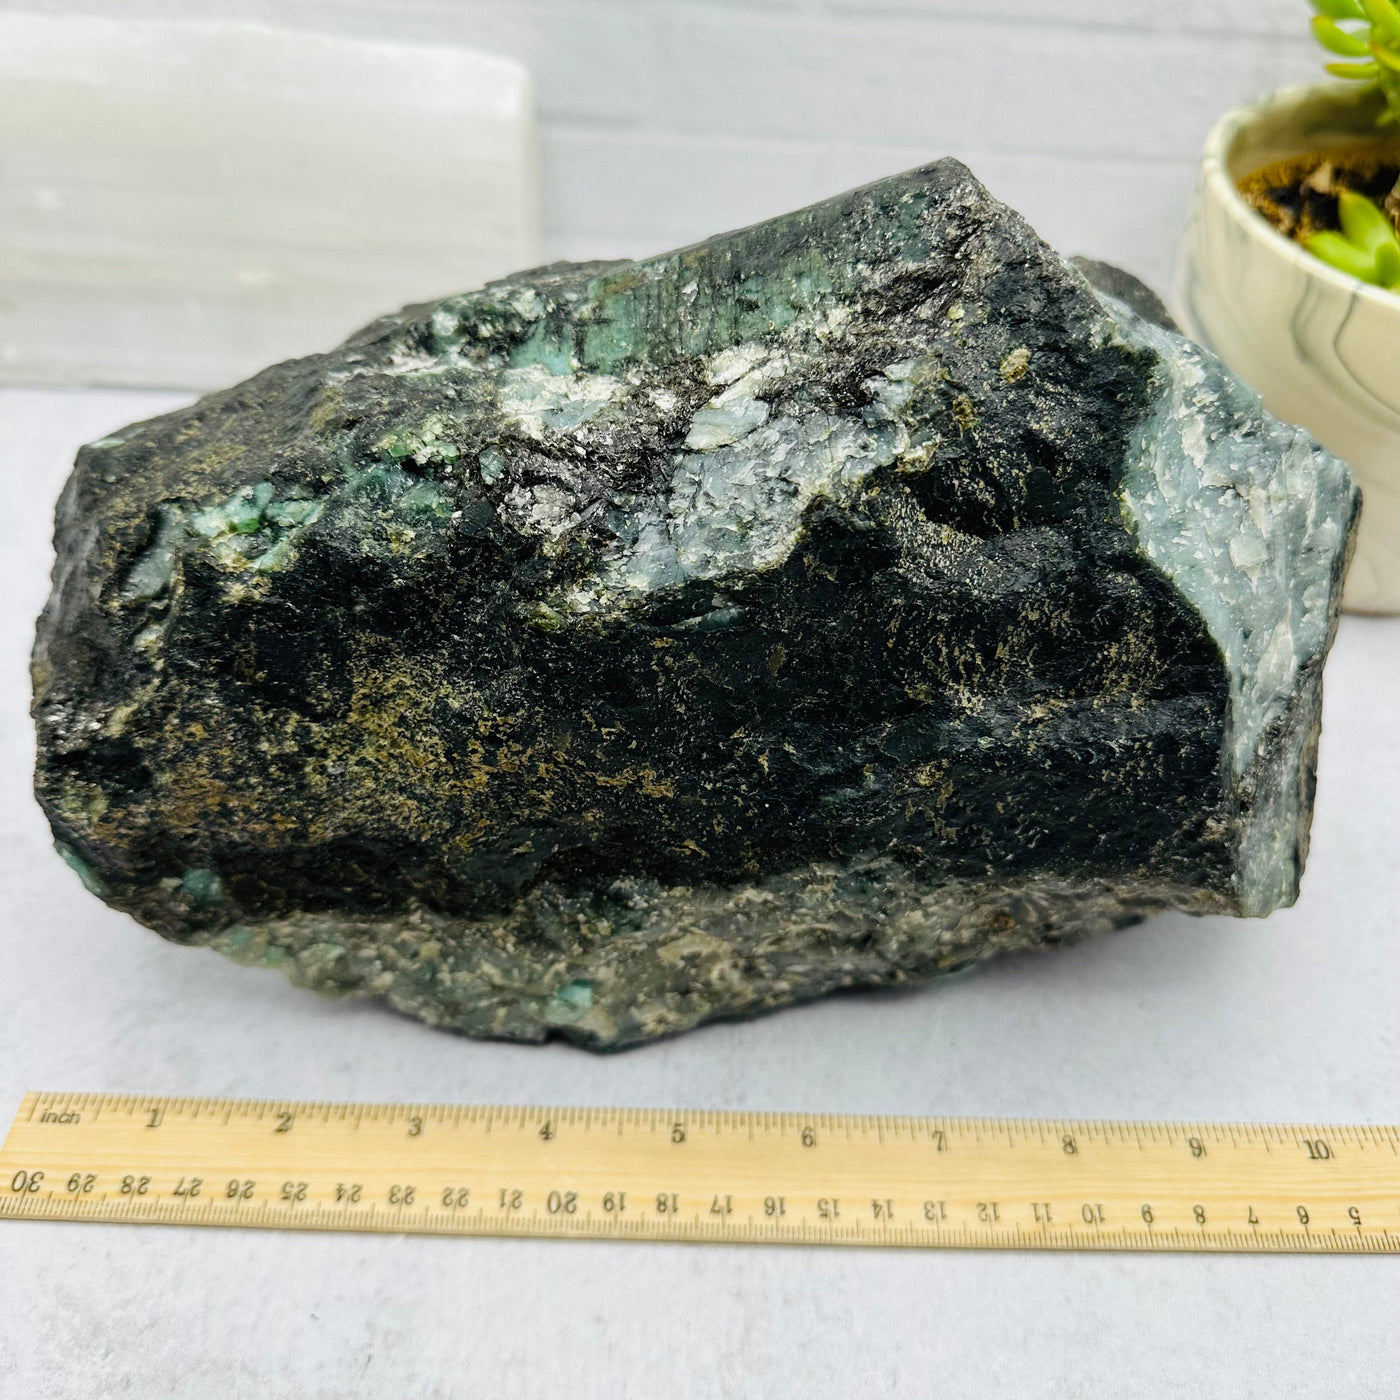 Emerald Large Rough Stone - OOAK - with measurements